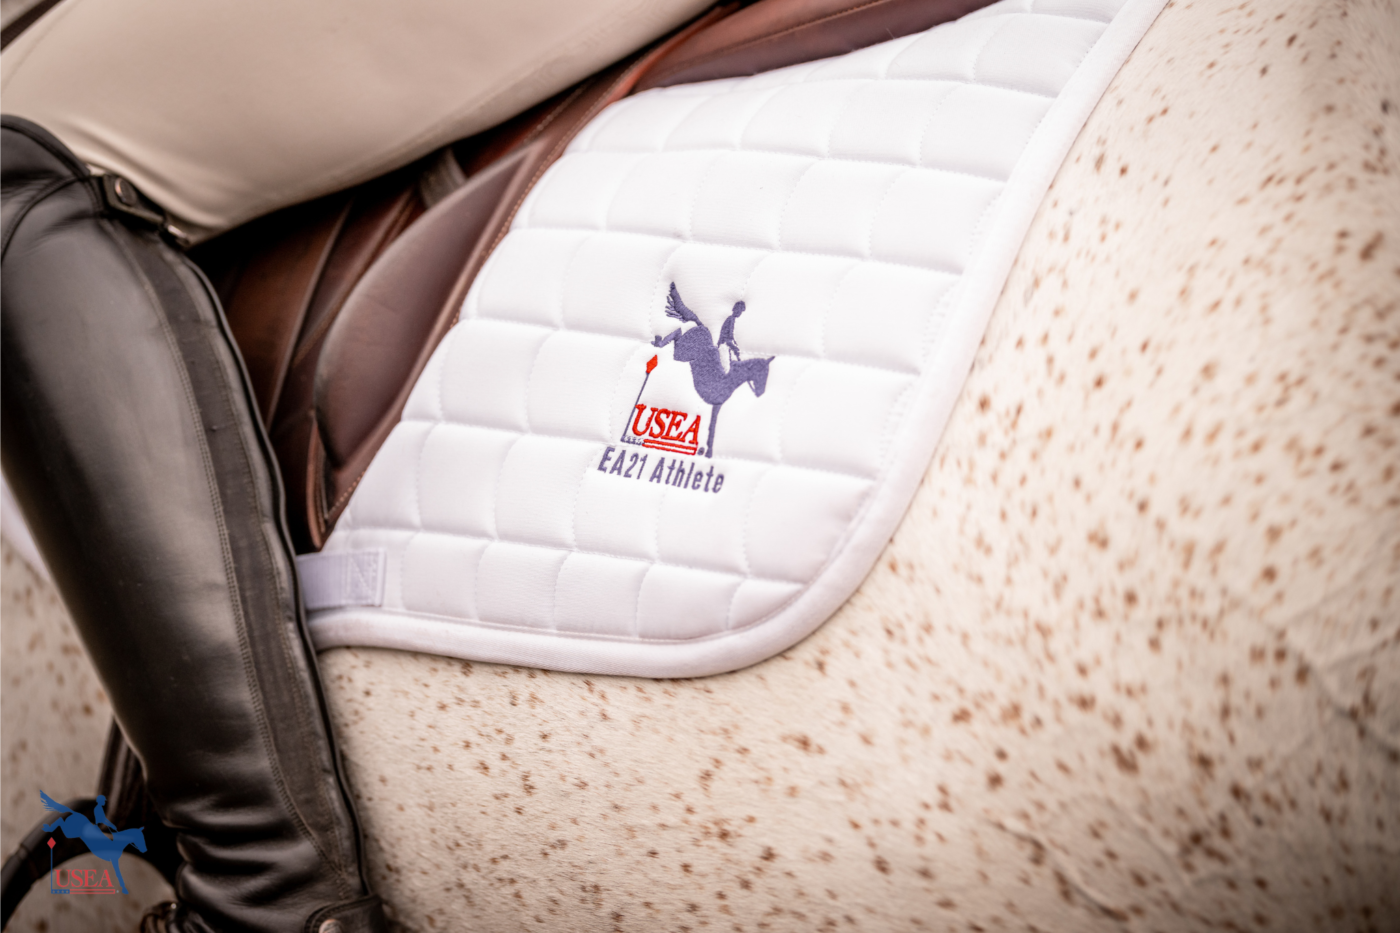 Each EA21 participant received a custom embroidered saddle pad and swag from USEA sponsors. USEA/Cortney Drake photo